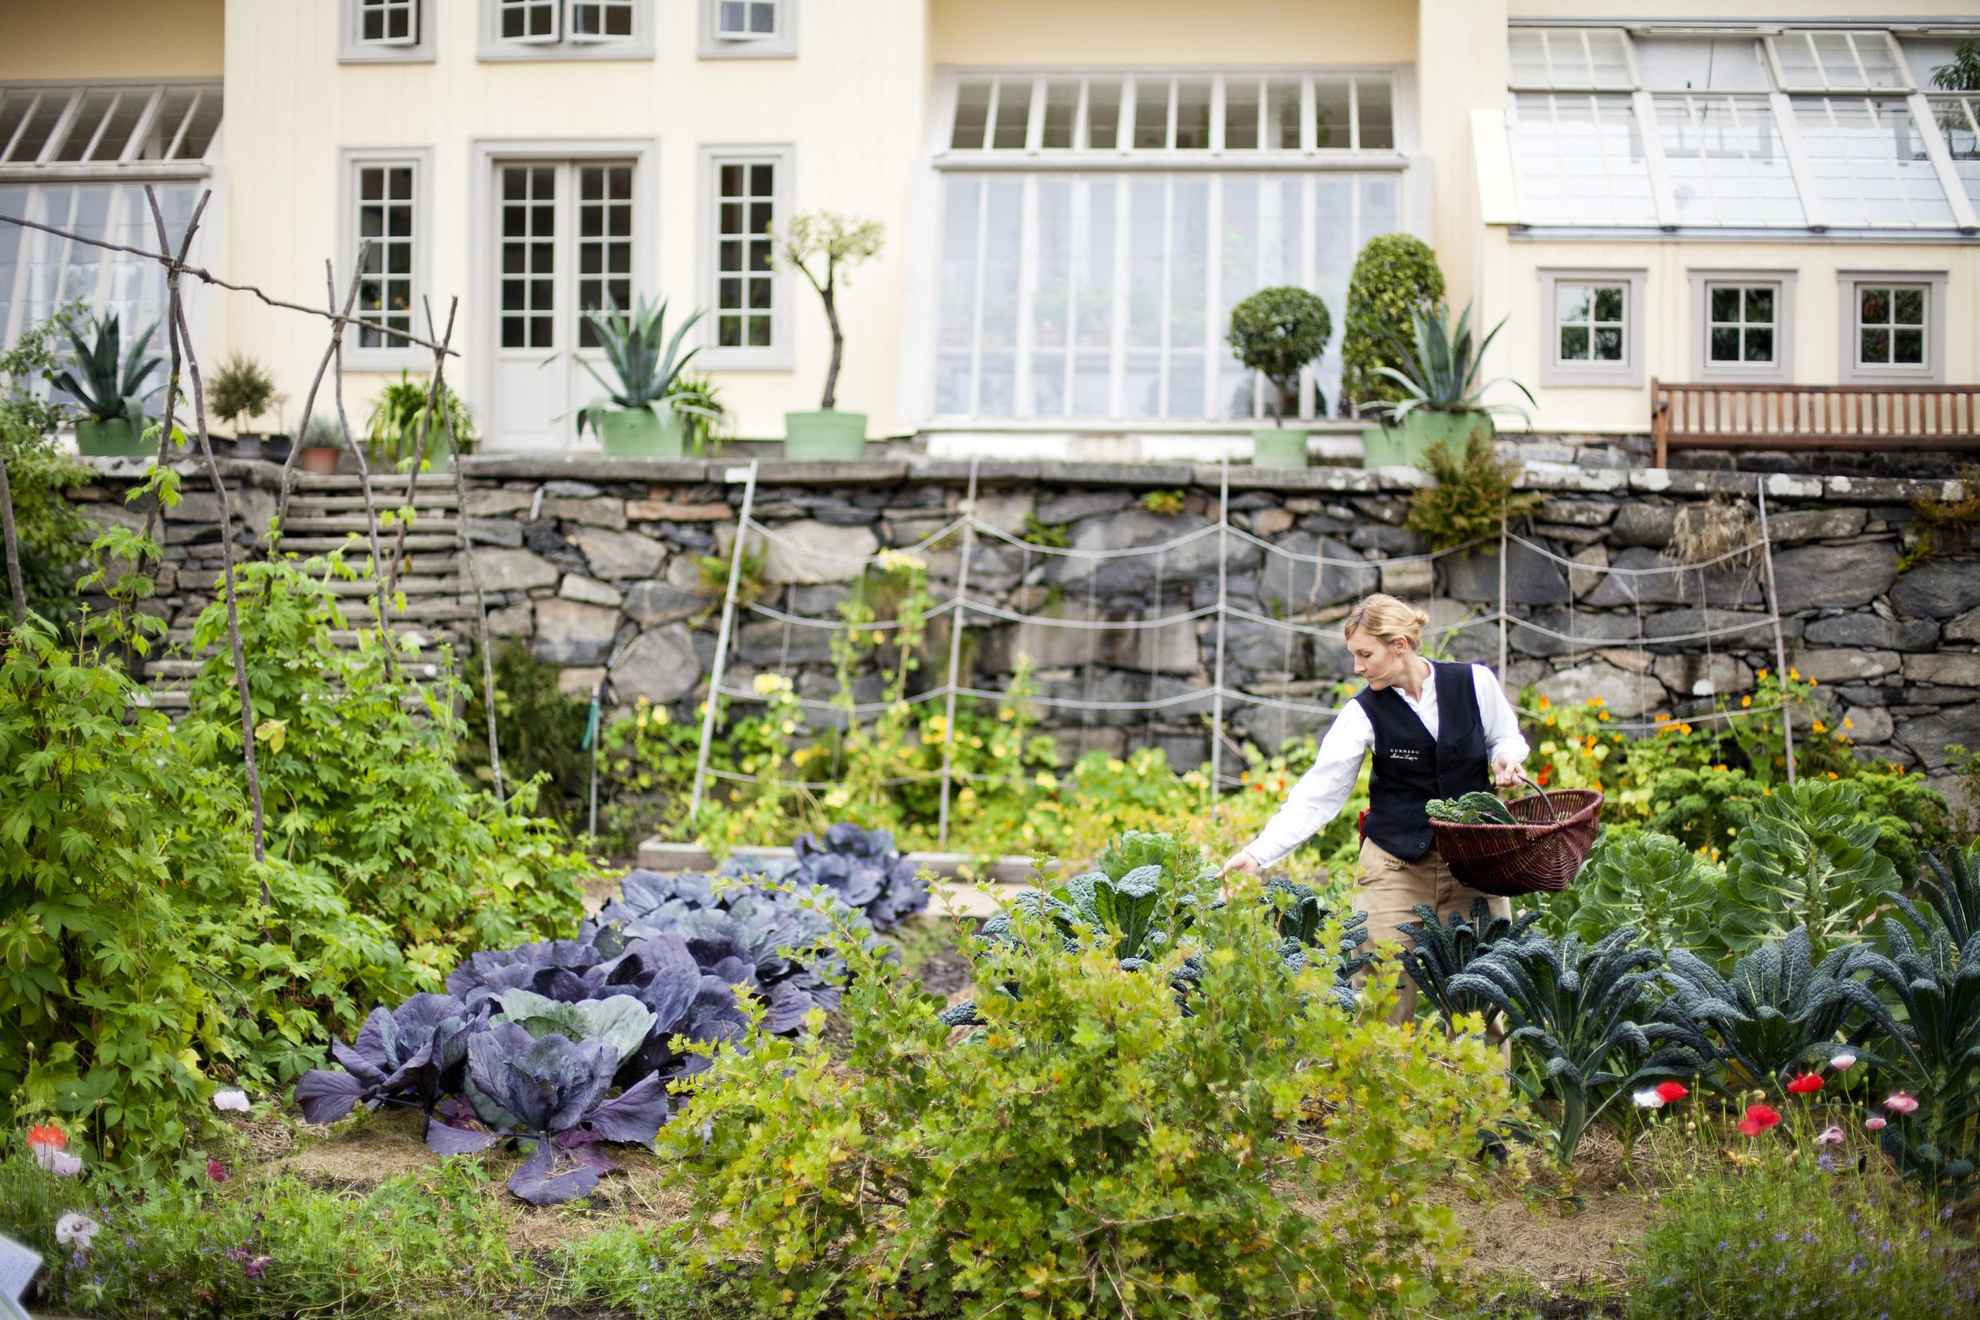 A woman picking vegetables in the garden at Gunnebo House & Gardens. A large house in the background.